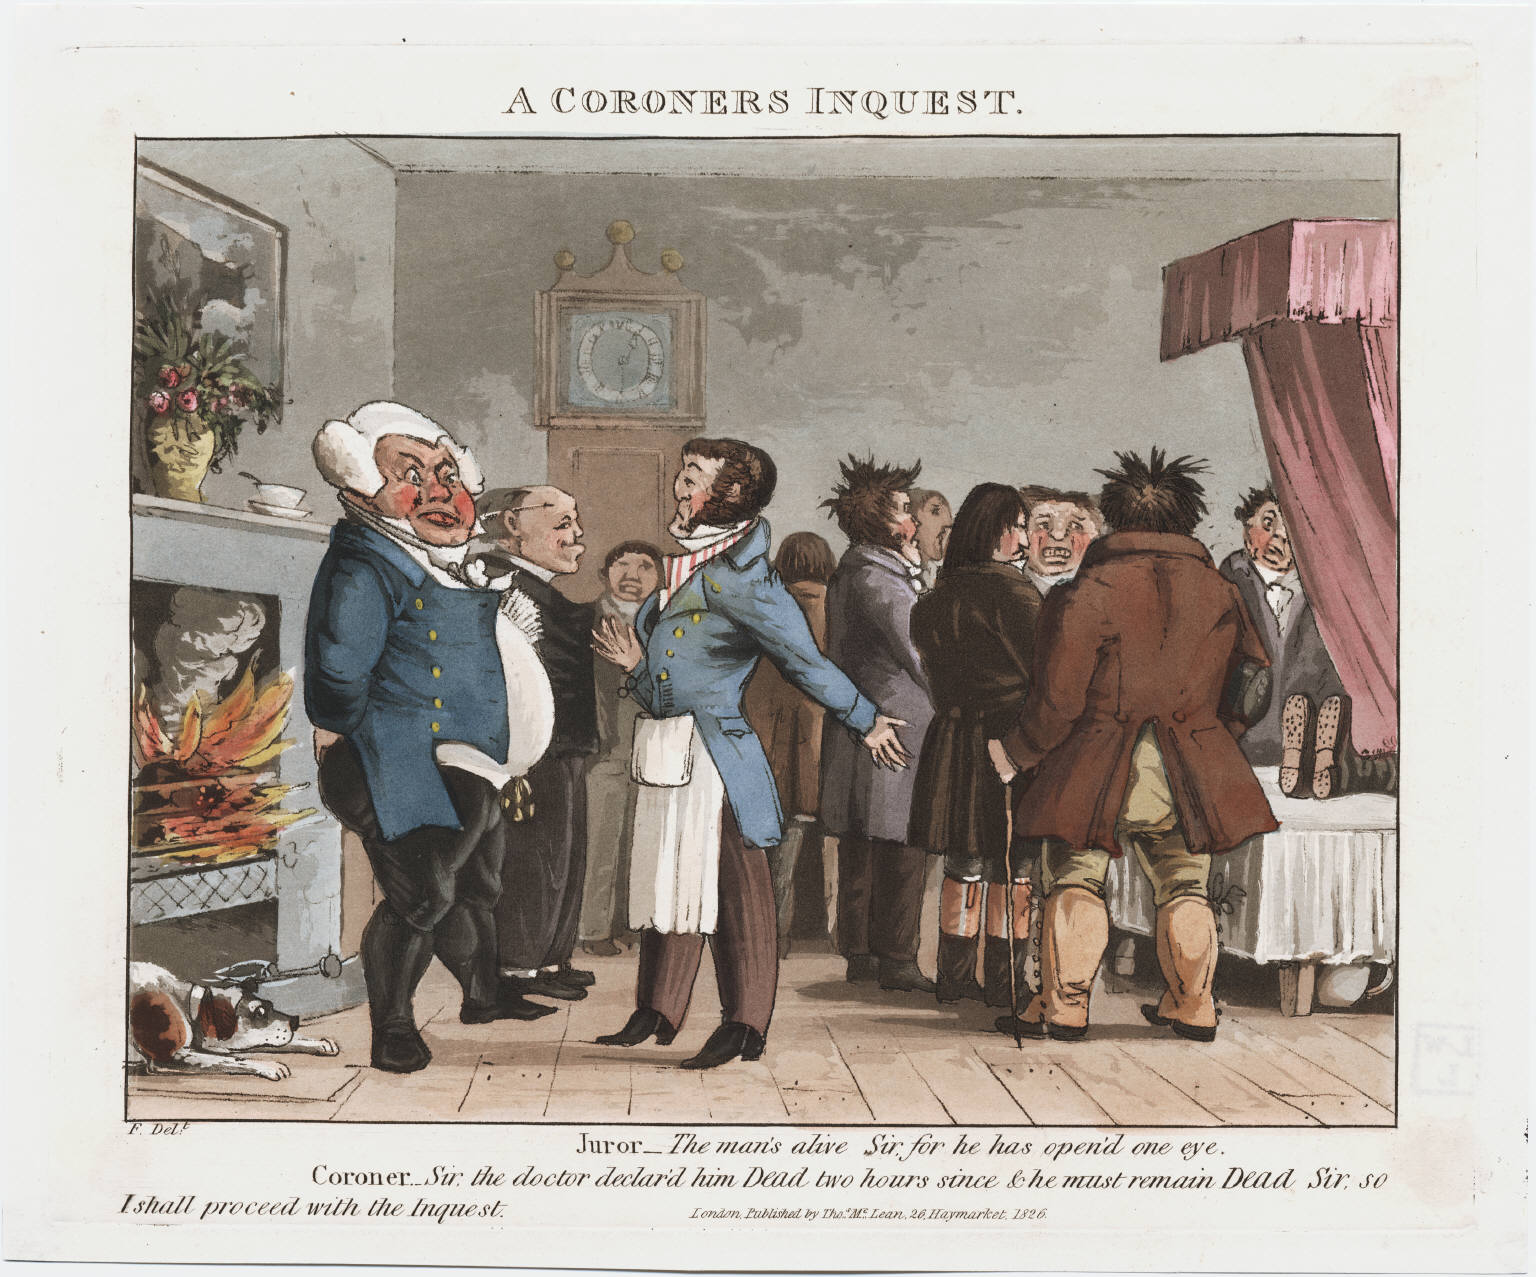 A large bewigged man in conversation with a younger man.  A group in the background look down on a bed, where a pair of booted feet can be seen.  Juror: The man's alive Sir for he has open'd one eye.  Coroner: Sir. the doctor declared him Dead two hours since & he must remain Dead Sir.  so I shall proceed with the Inquest.